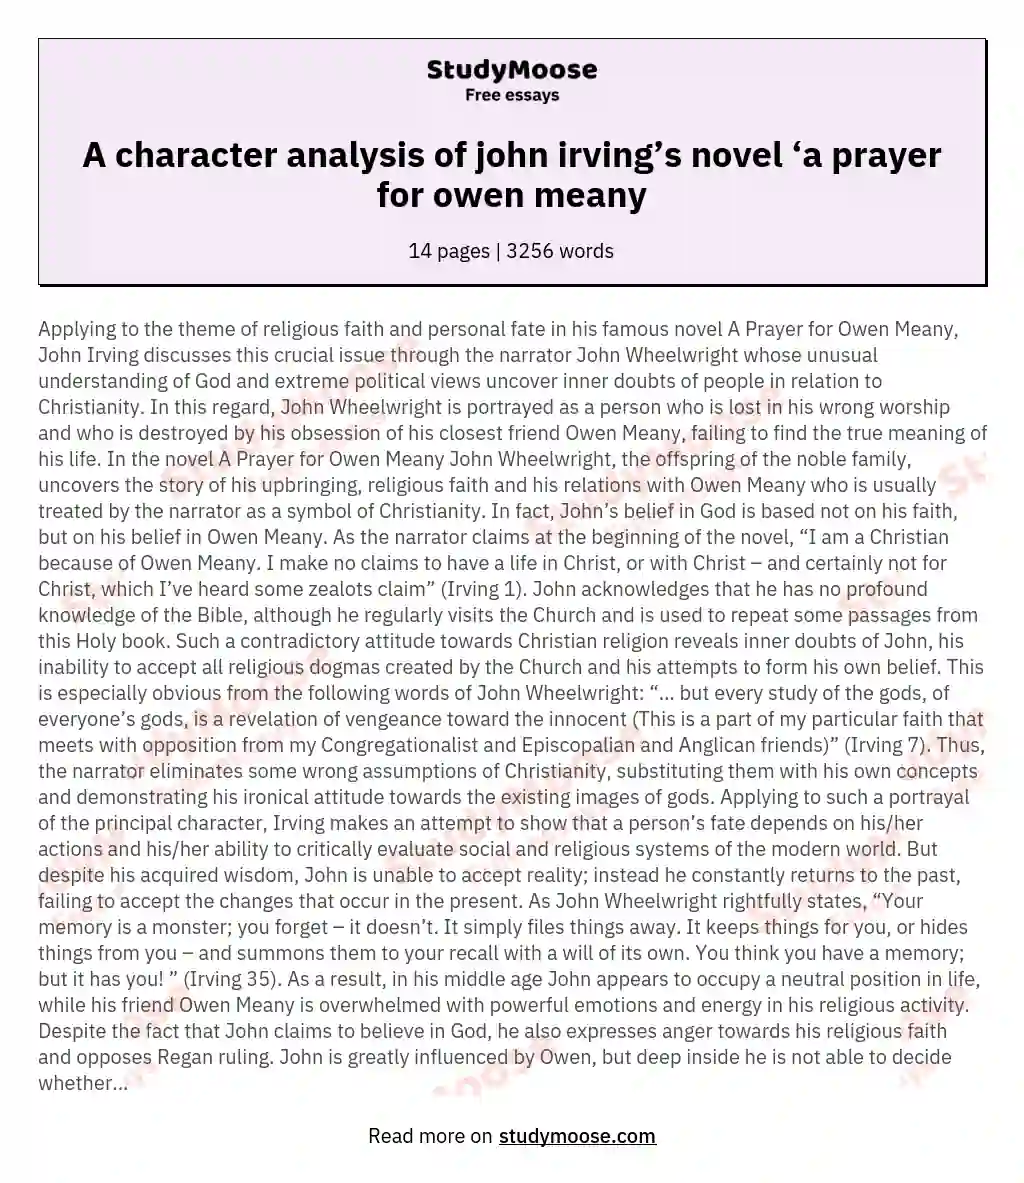 A character analysis of john irving’s novel ‘a prayer for owen meany